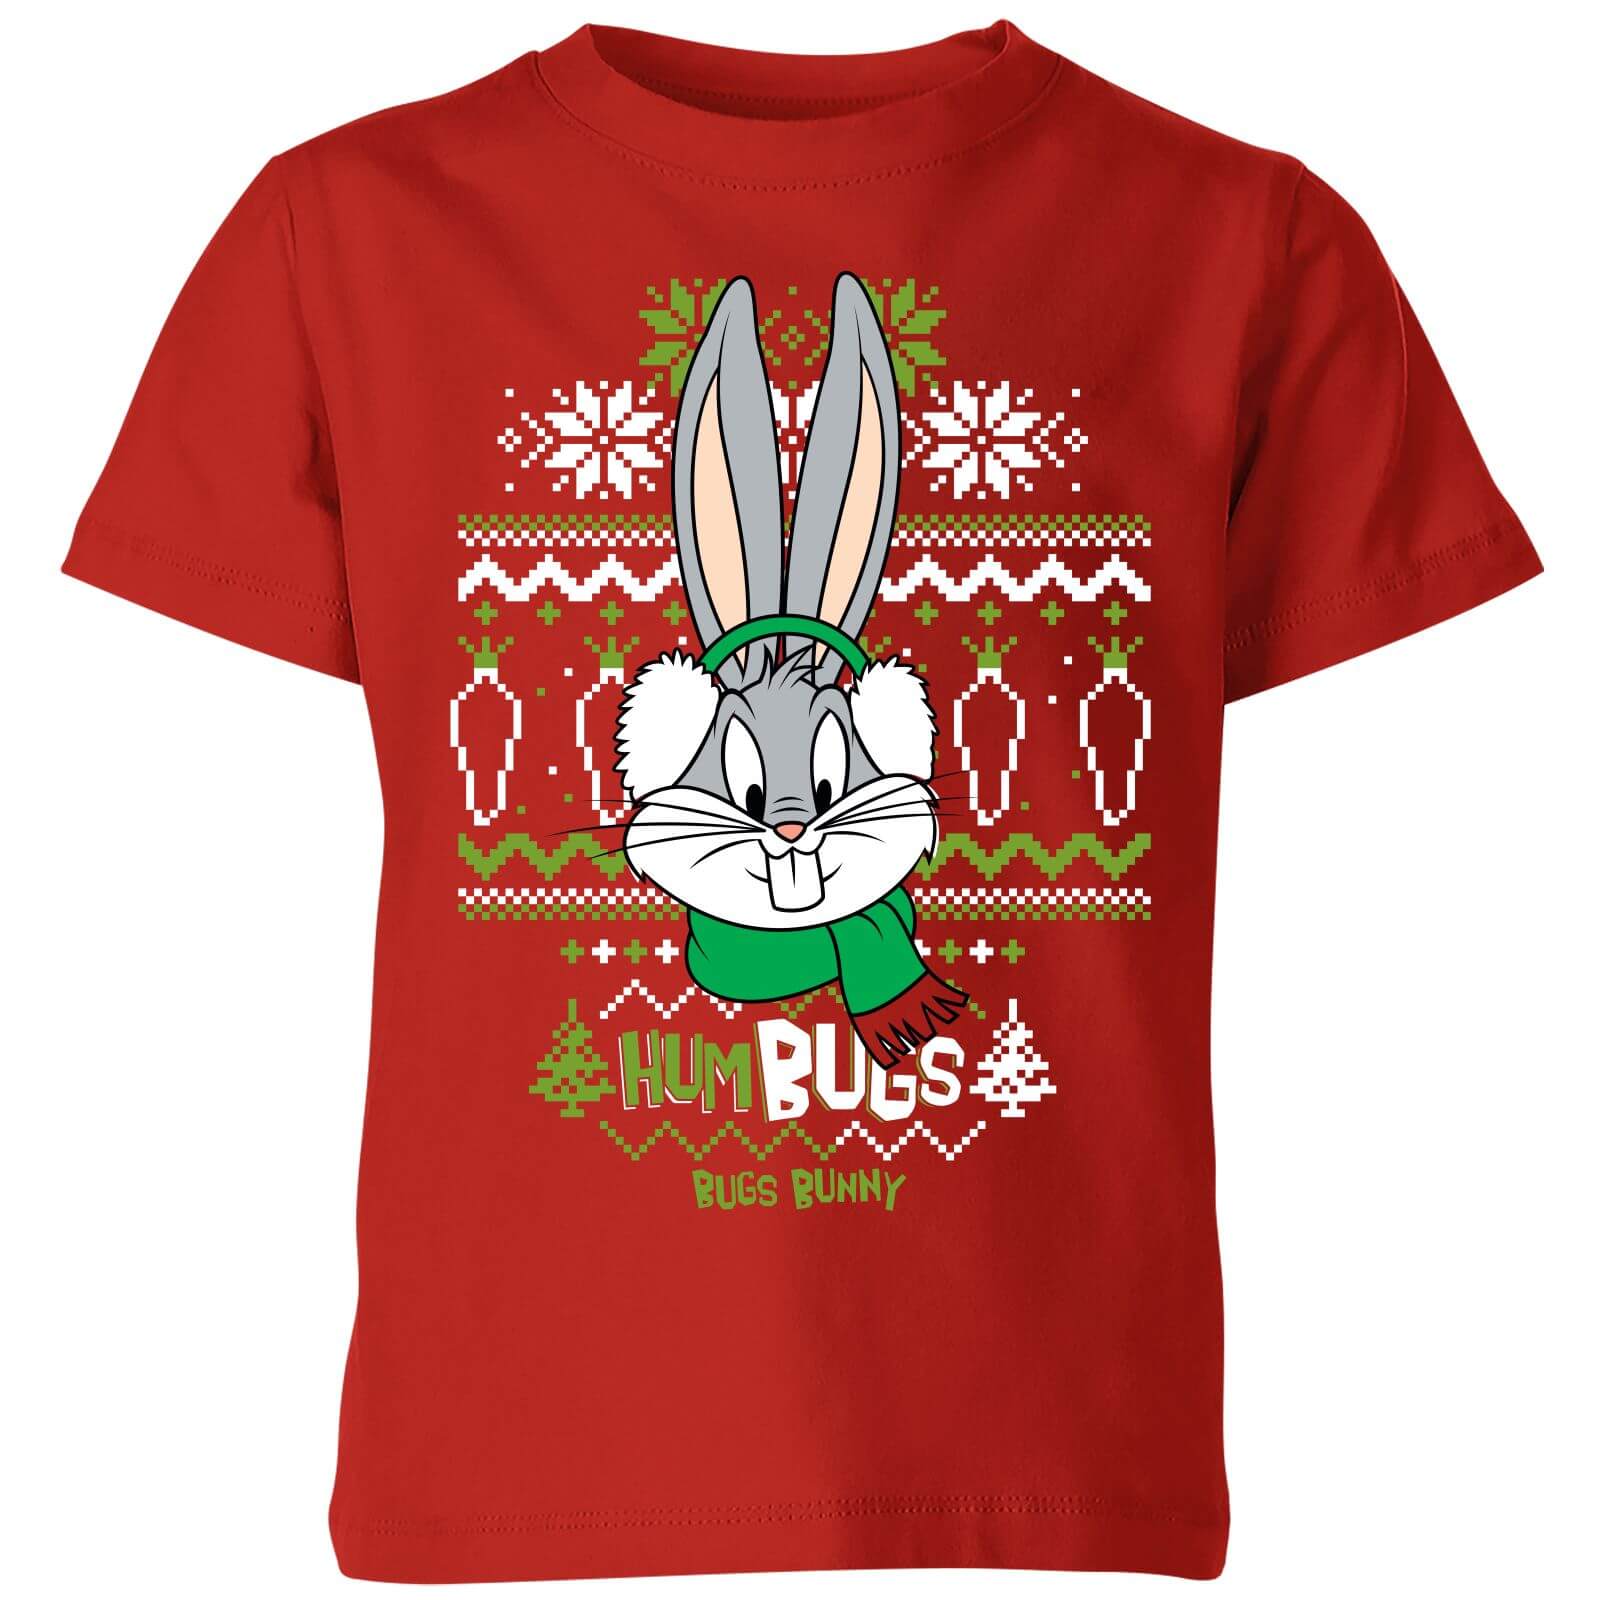 Looney Tunes Bugs Bunny Knit Kids' Christmas T-Shirt - Red - 11-12 Years - Red